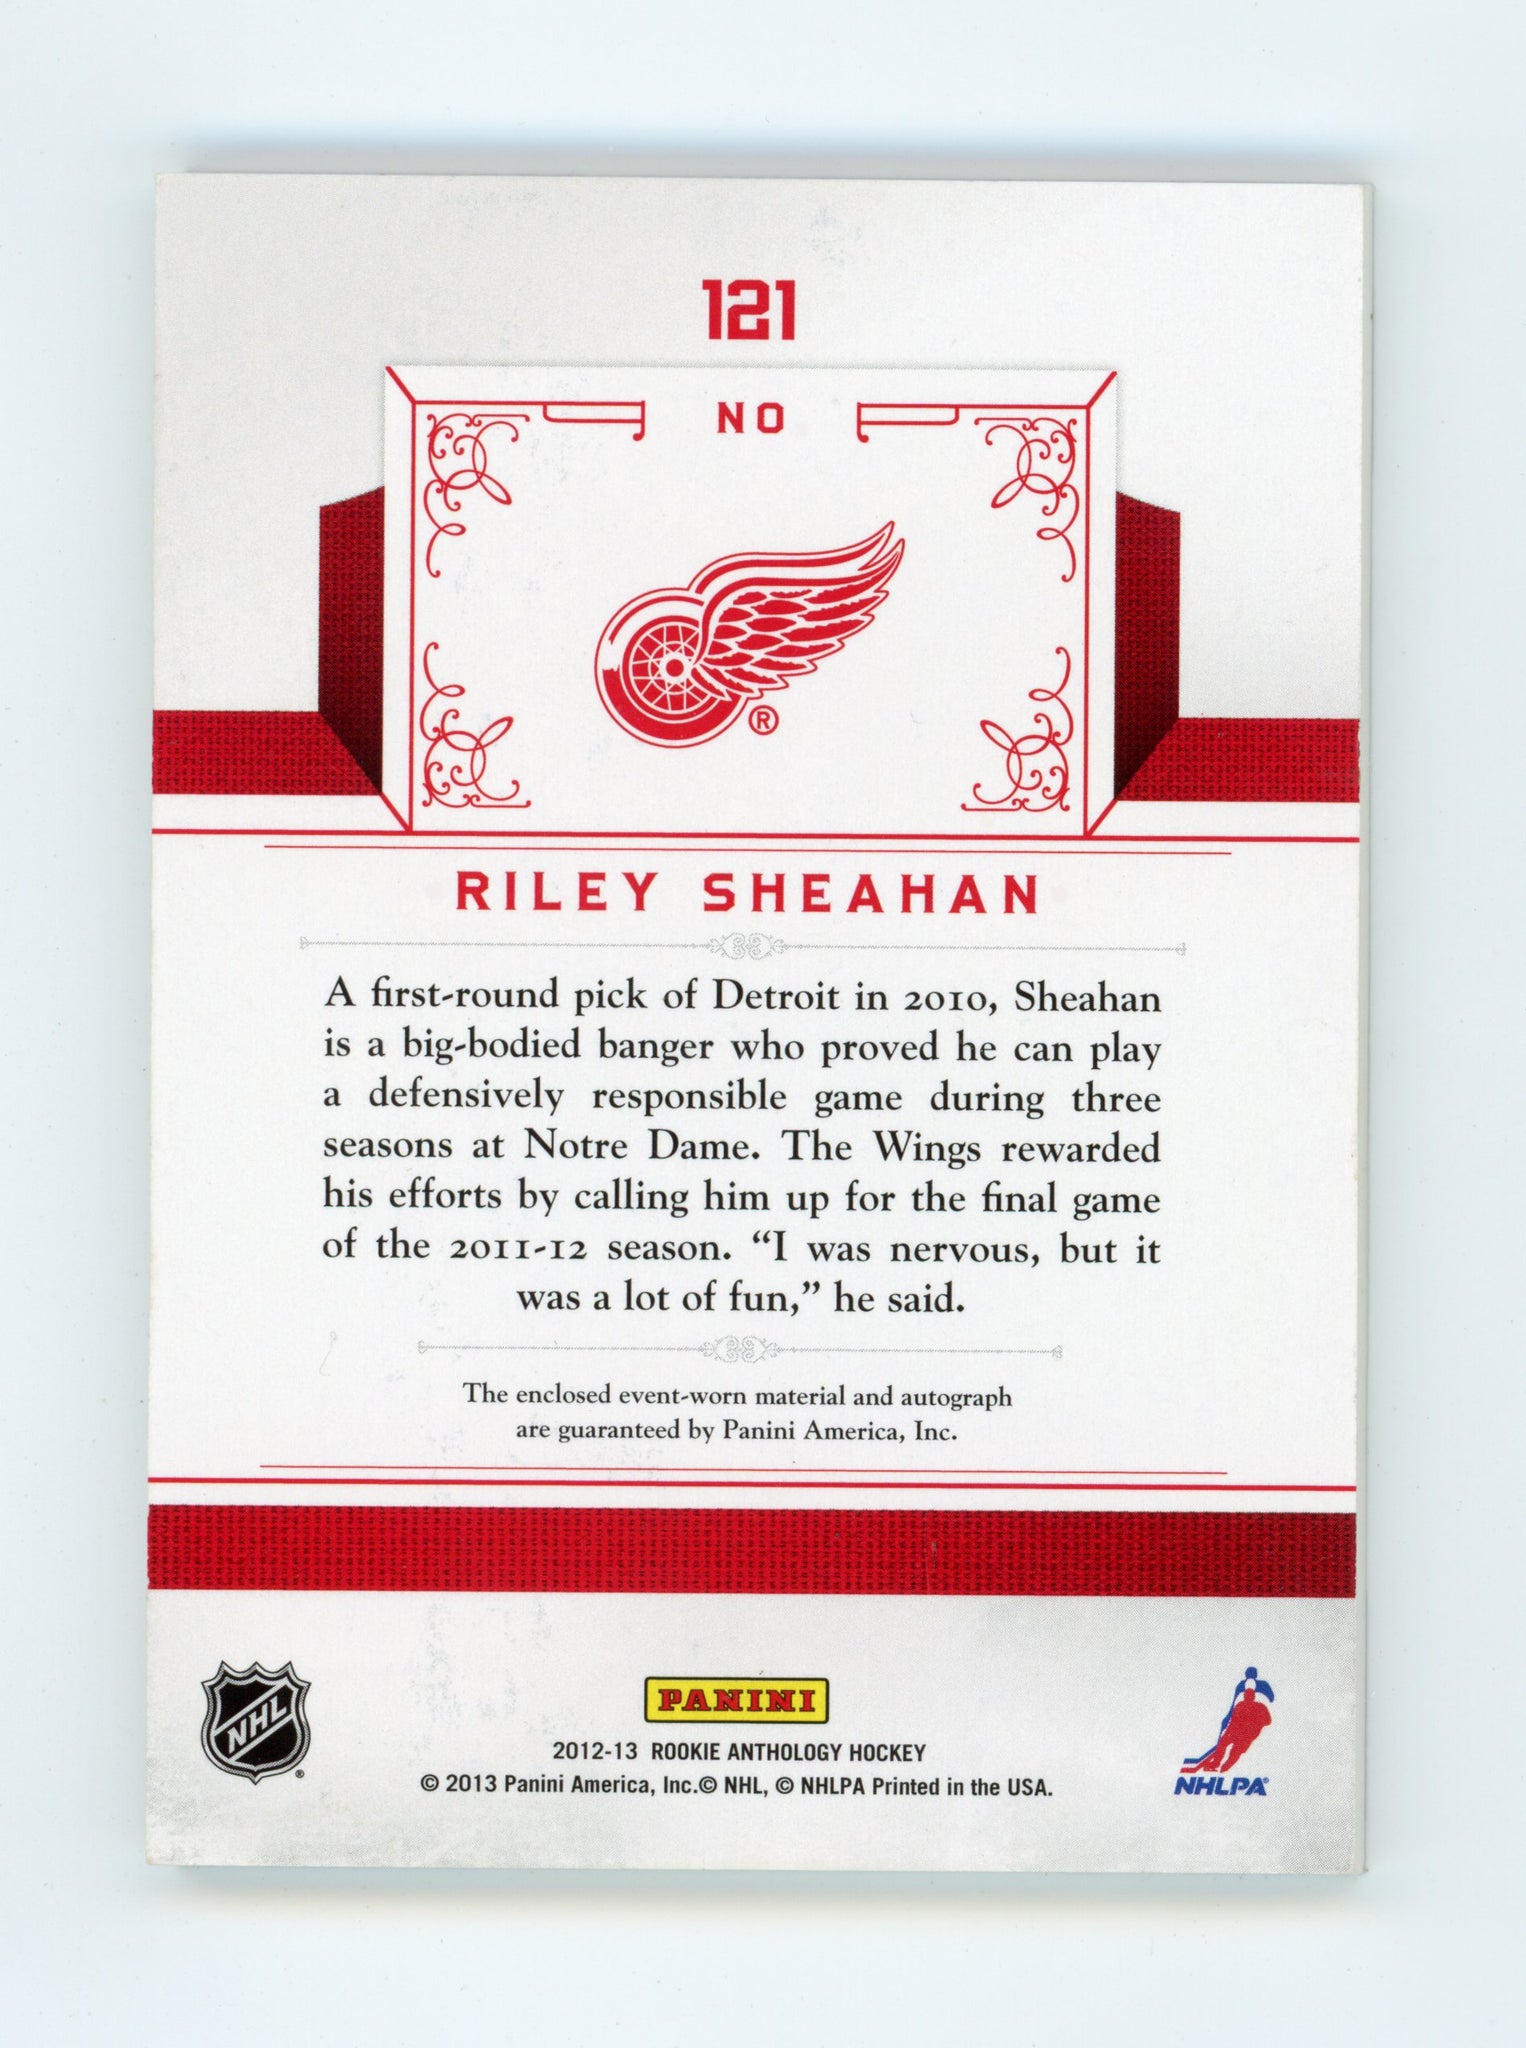 2012-2013 Riley Sheahan Rookie Treasures Auto #d /499 Panini Detroit Red Wings # 121